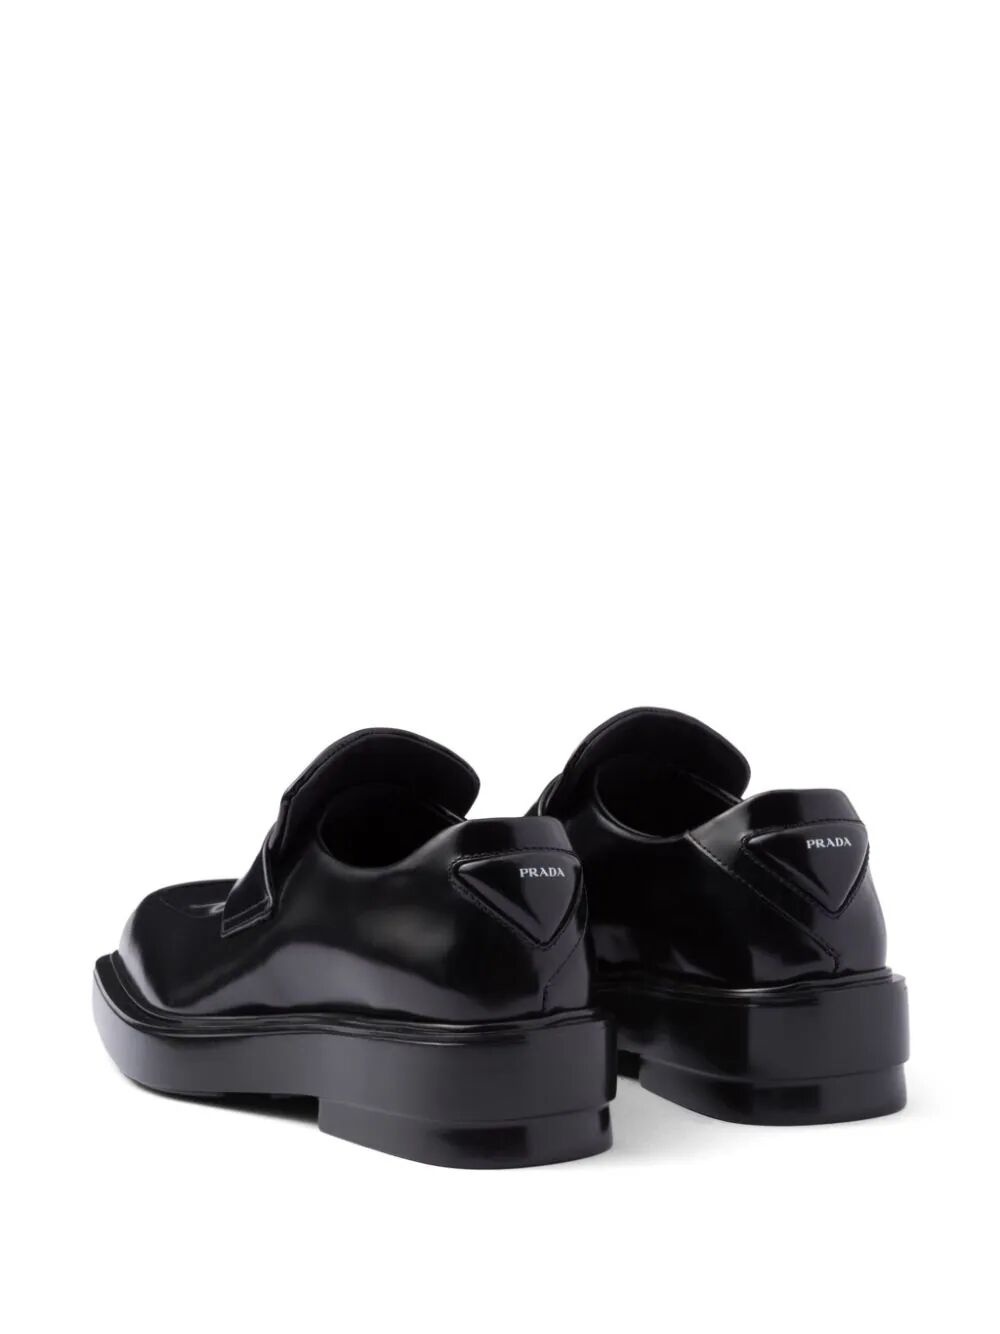 PRADA FENDER SQUARE LEATHER LOAFERS - 8